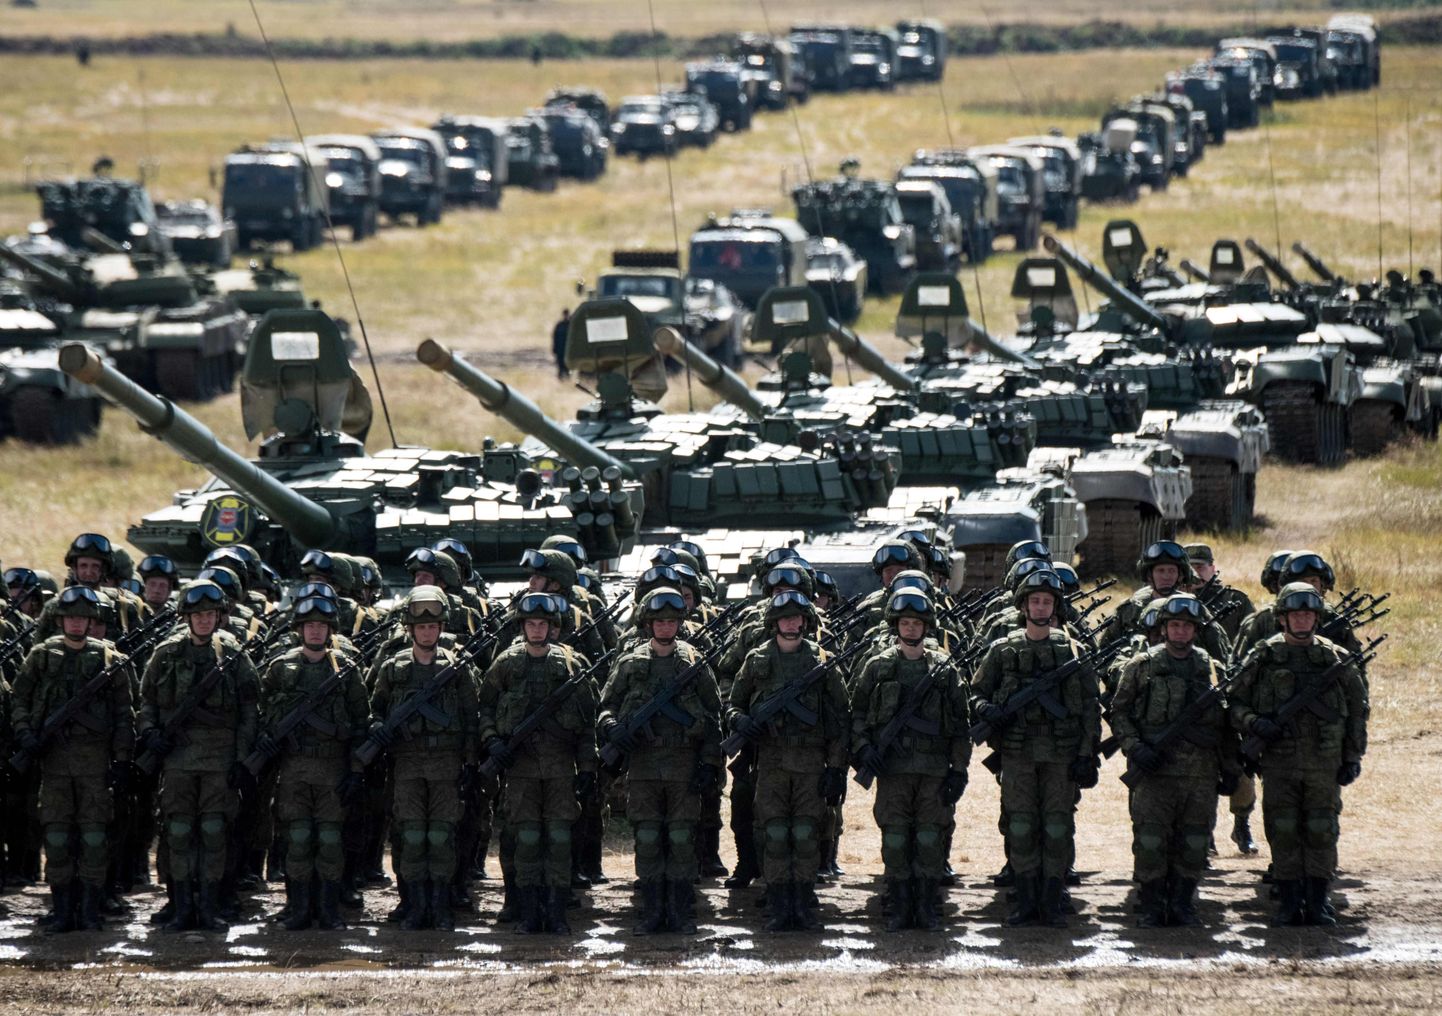 Russian troops and military equipment parade at the end of the day of the Vostok-2018 (East-2018) military drills on September 13, 2018.